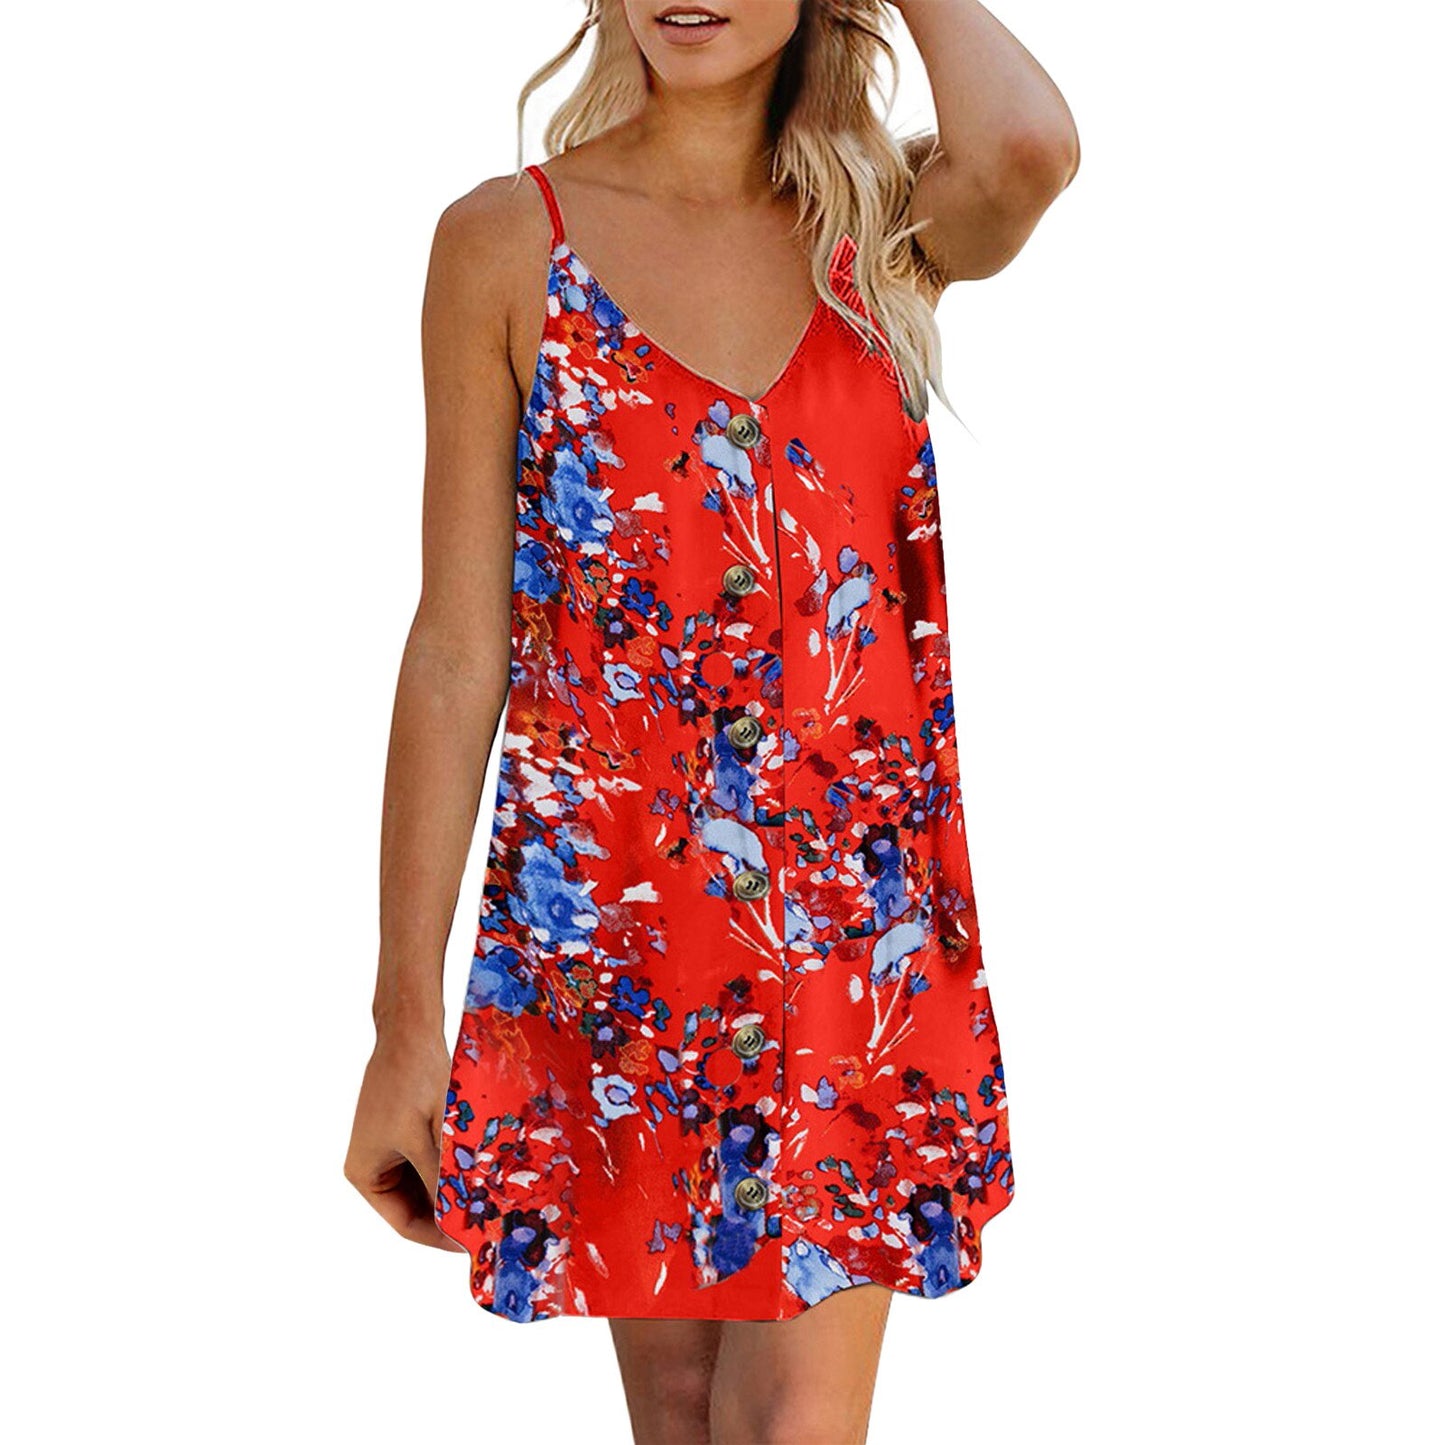 Women Summer Leisure Time On Vacation Mini Dress Sexy Floral Print Sleeveless Backless Camisole Dresses Casual V-Neck Vestidos